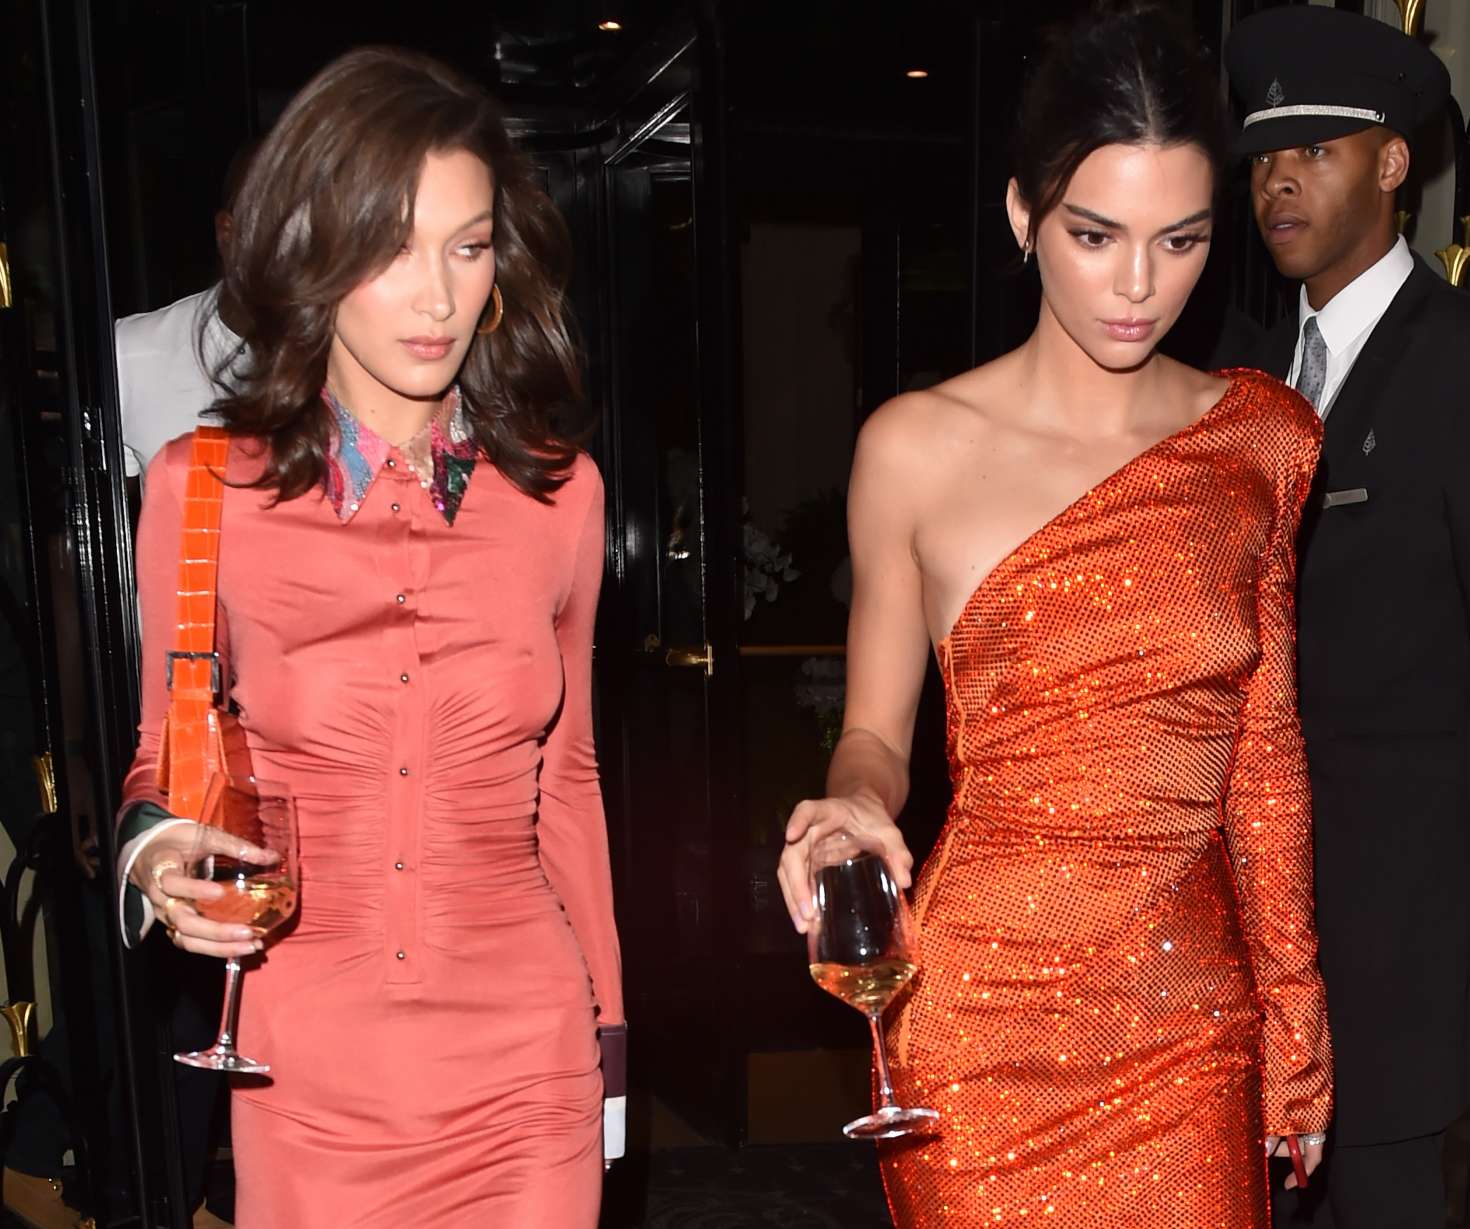 Bella Hadid and Kendall Jenner in Red Dress â€“ Leaving the George V Hotel in Paris